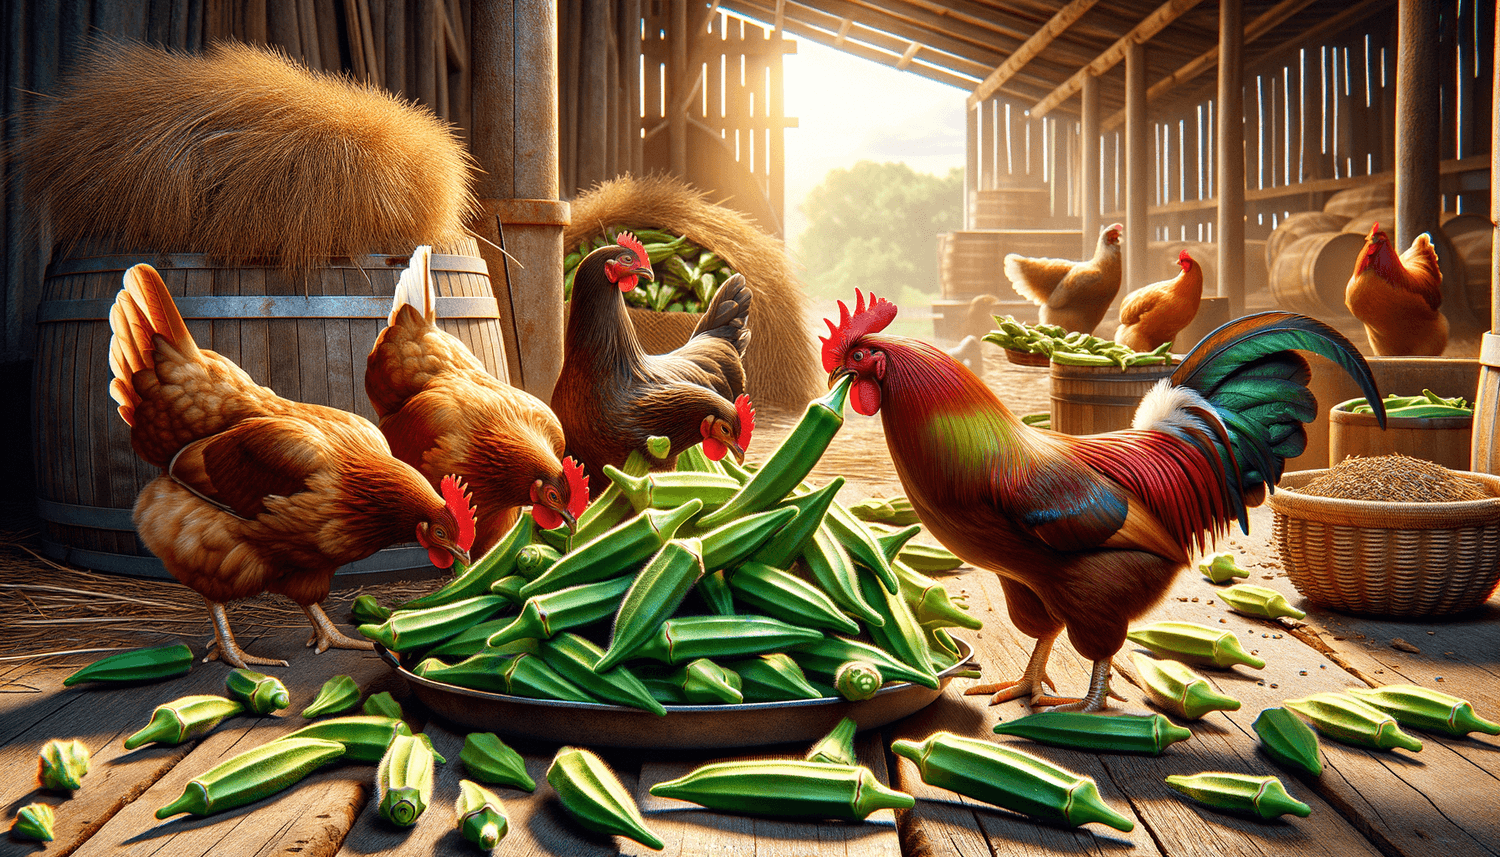 Can Chickens Eat Okra Pods?